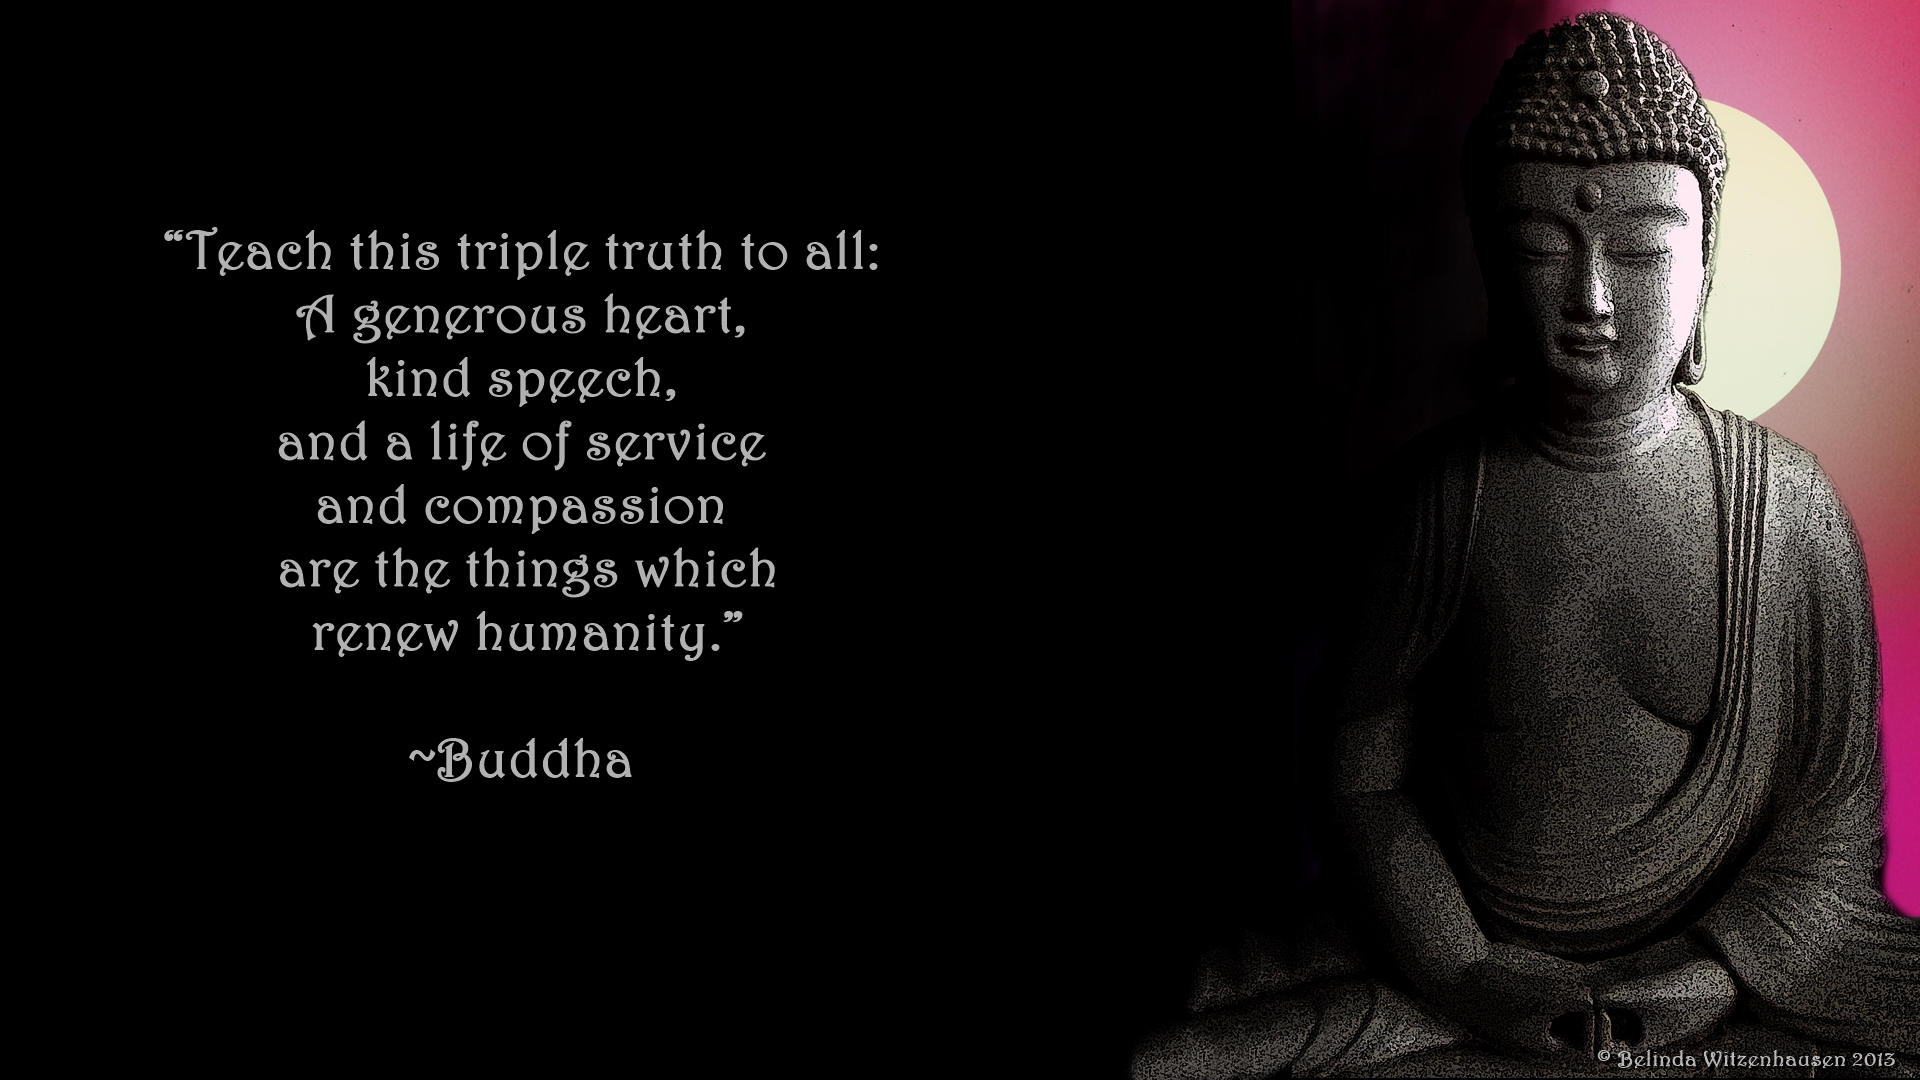 Wallpaper With Positive Quote By Lord Buddha Triple Truth For All